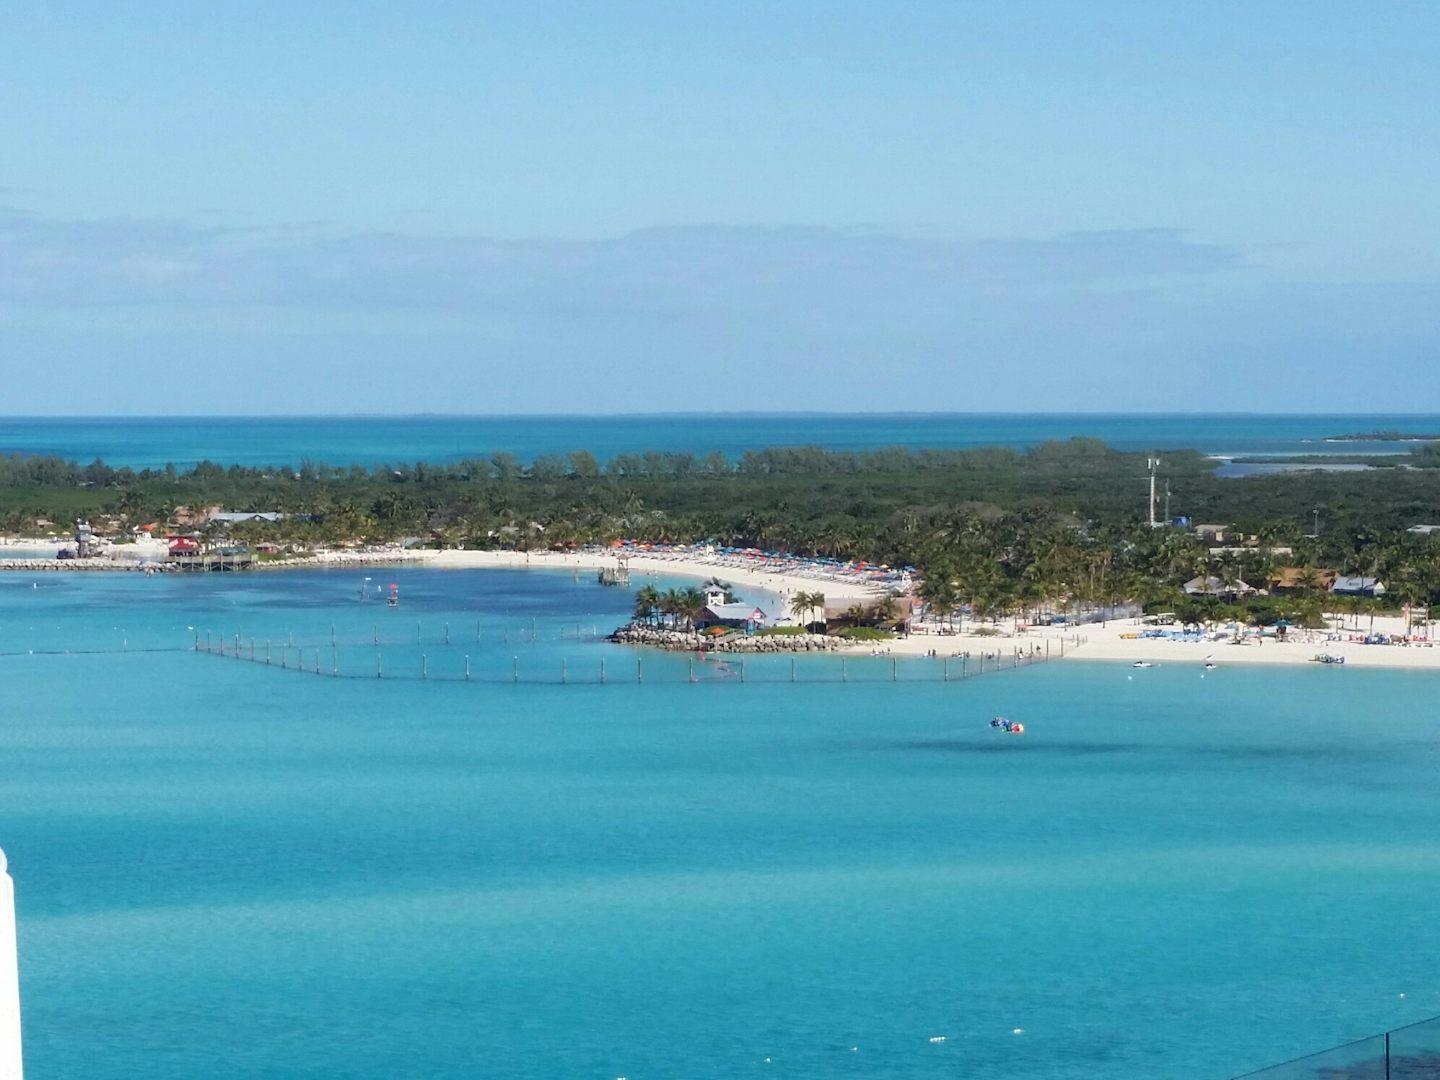 taken from the ship as we were docking for Castaway Cay.